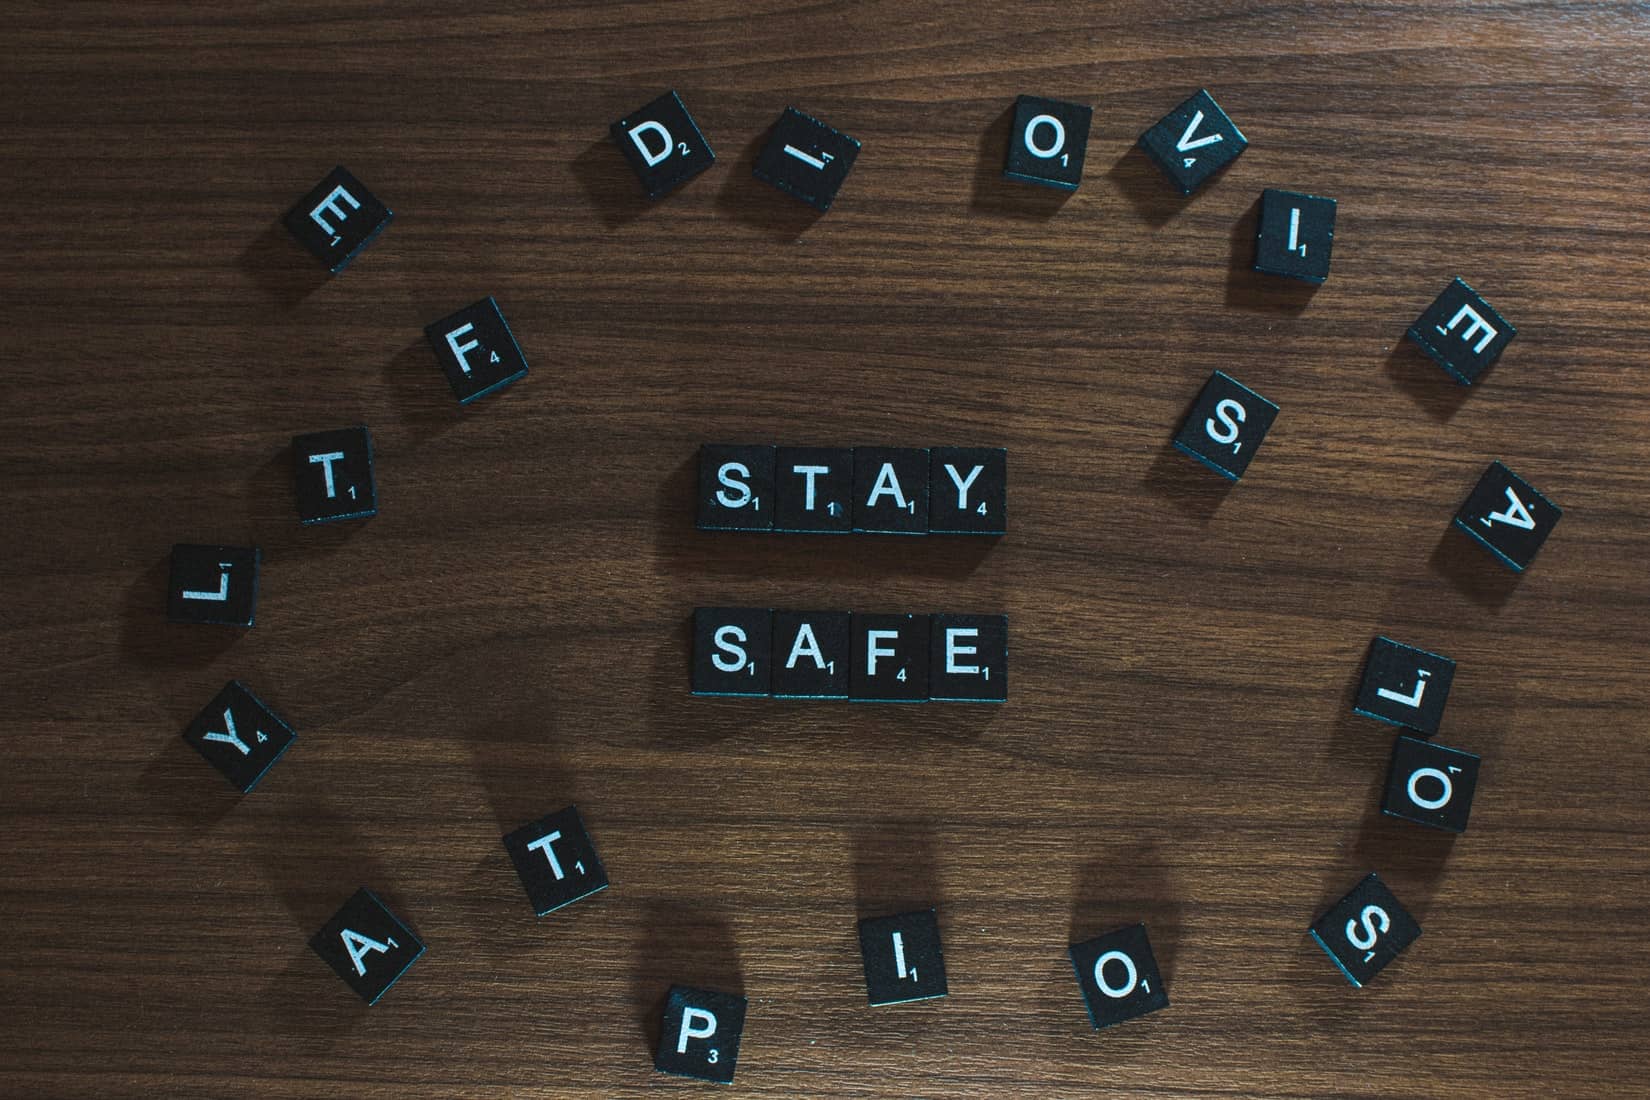 scrabble letters spelling out stay safe